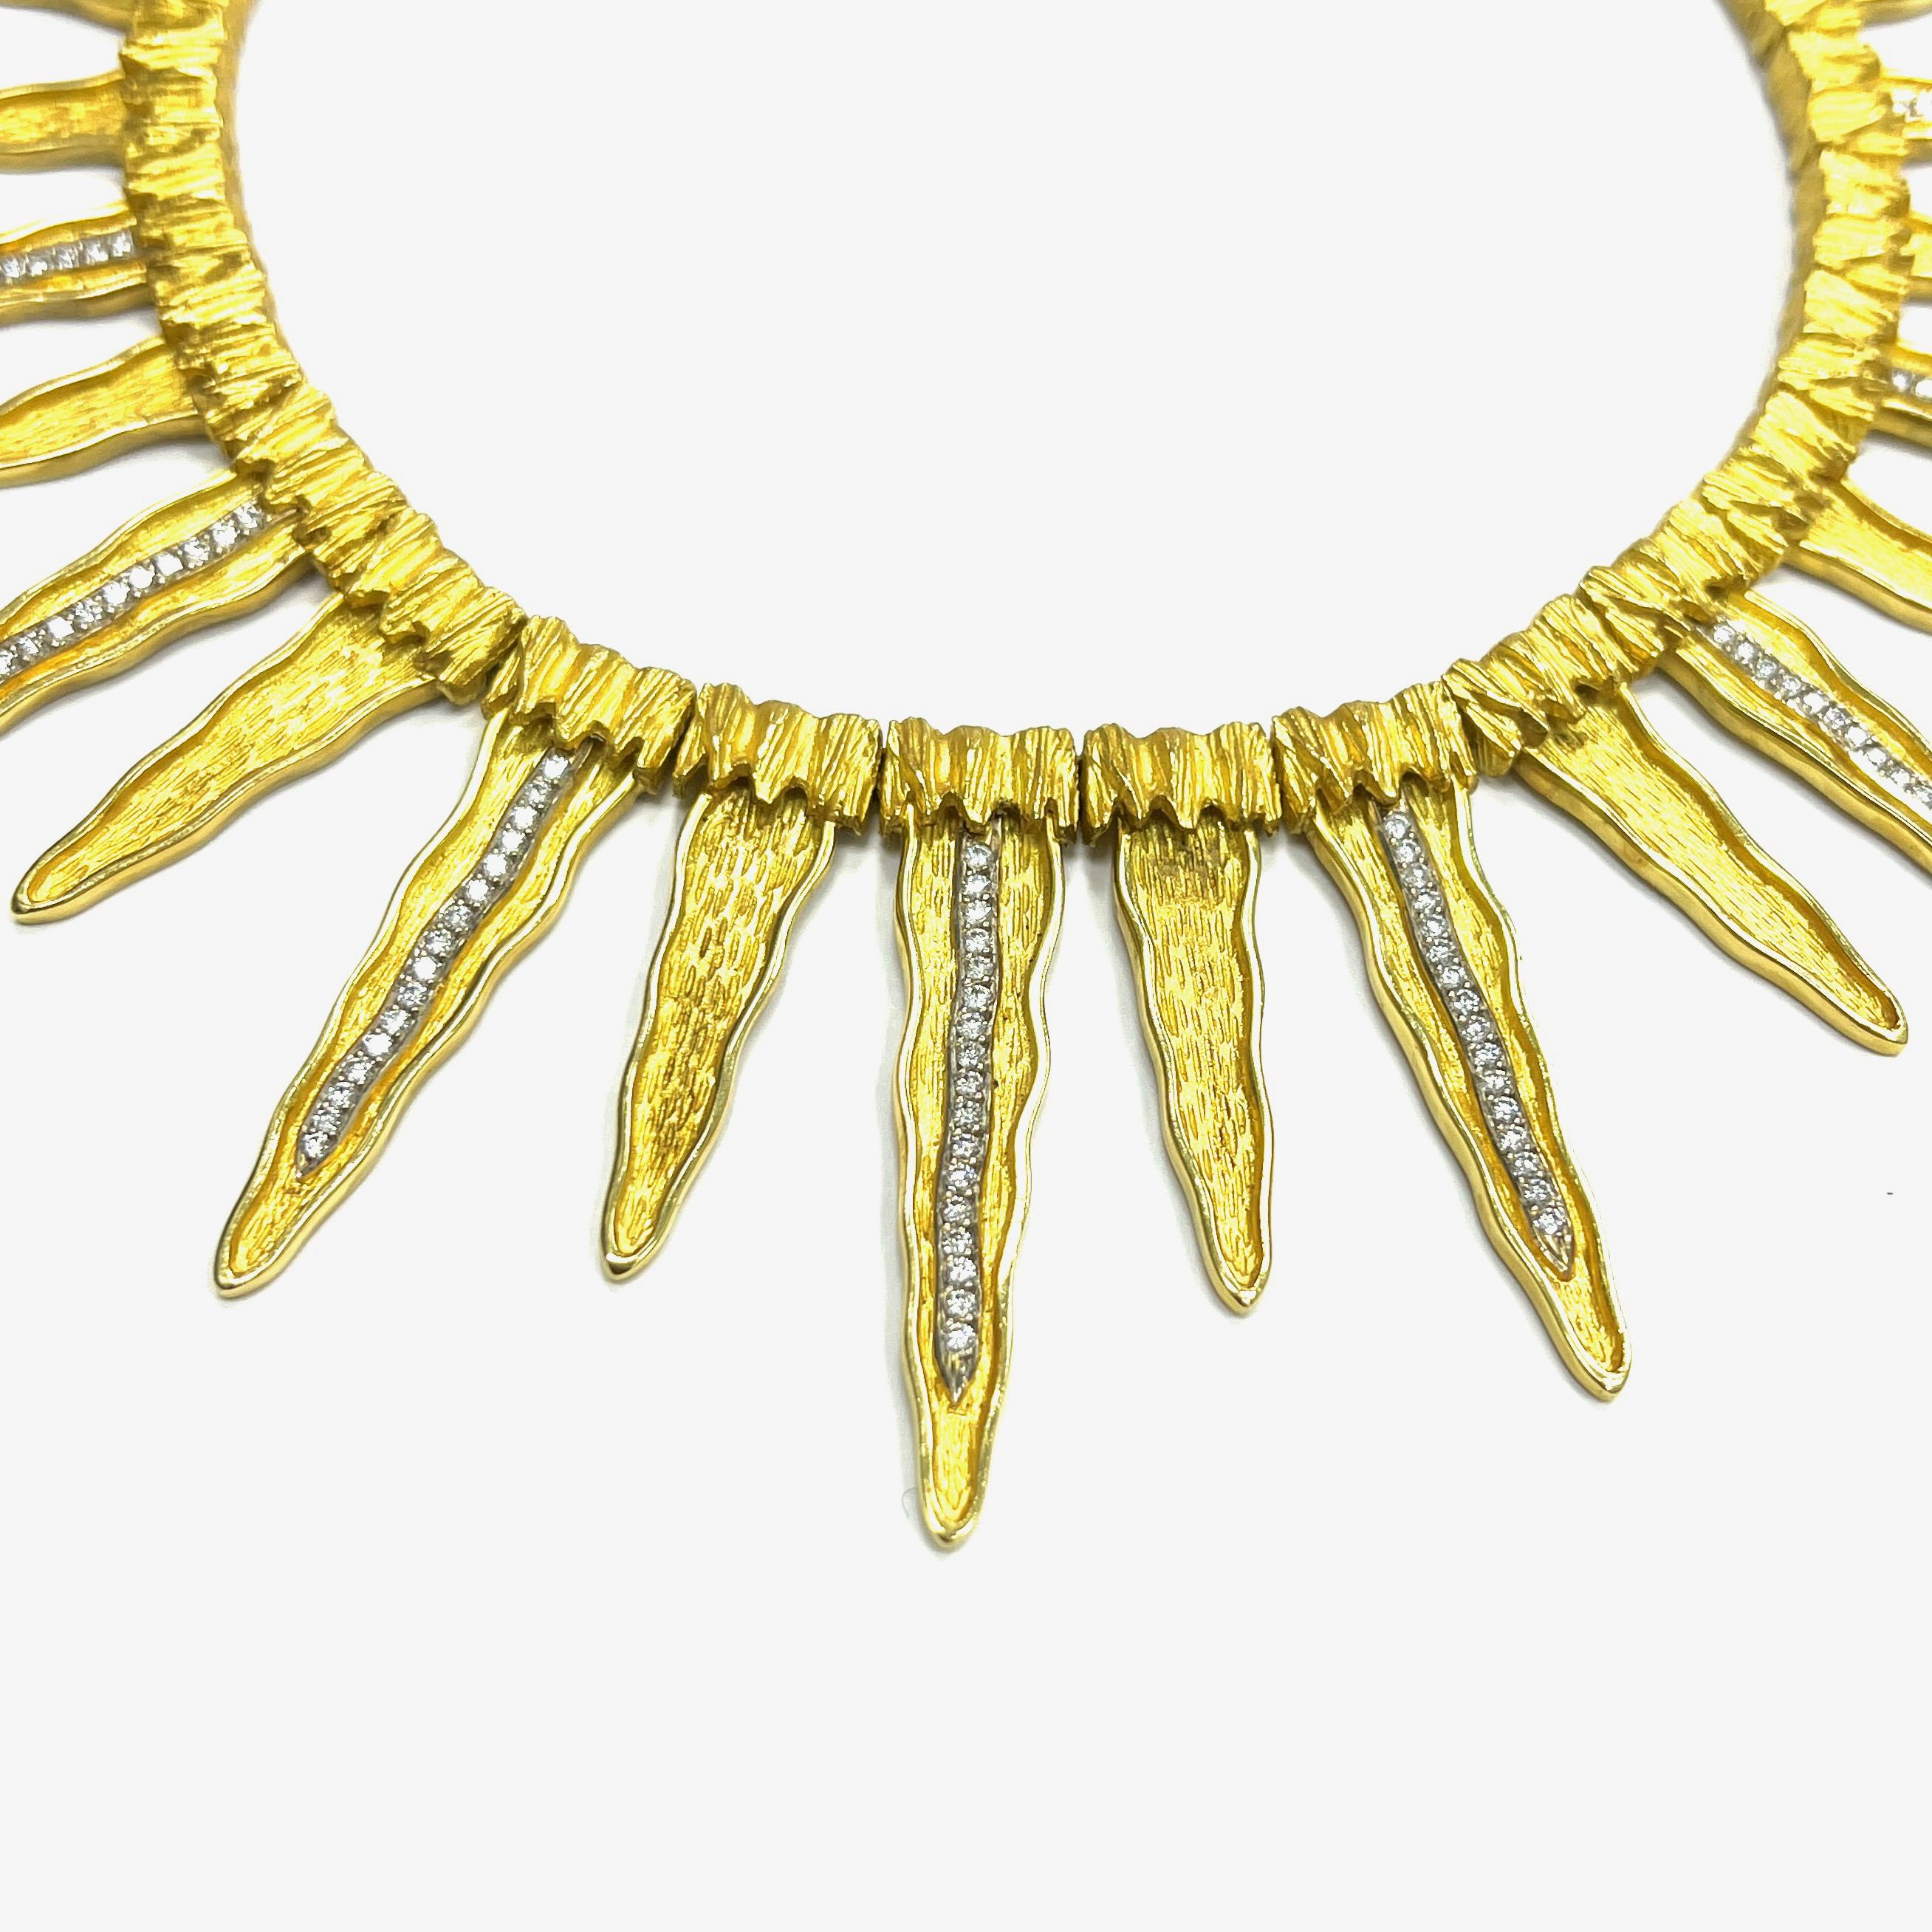 Maramenos & Pateras Icicle Diamond Yellow Gold Necklace

One hundred and five round brilliant cut diamonds of approximately 2.10 carats total, with SI1 clarity and I color; set on 18 karat yellow gold; marked Maramenos & Pateras, 750

Size: width 2